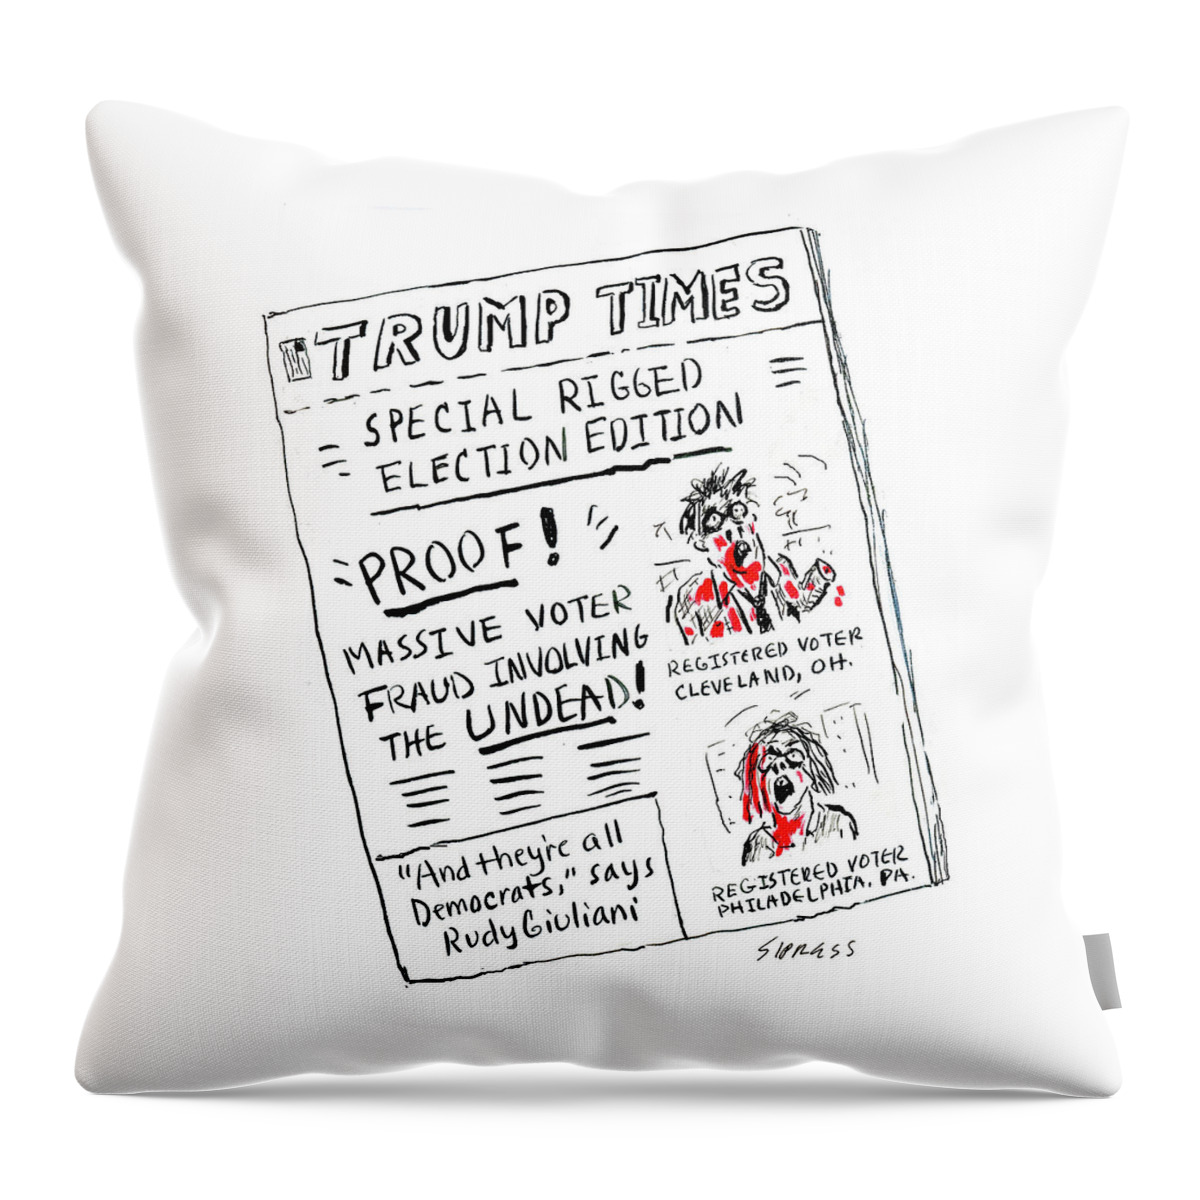 Special Rigged Election Edition Throw Pillow